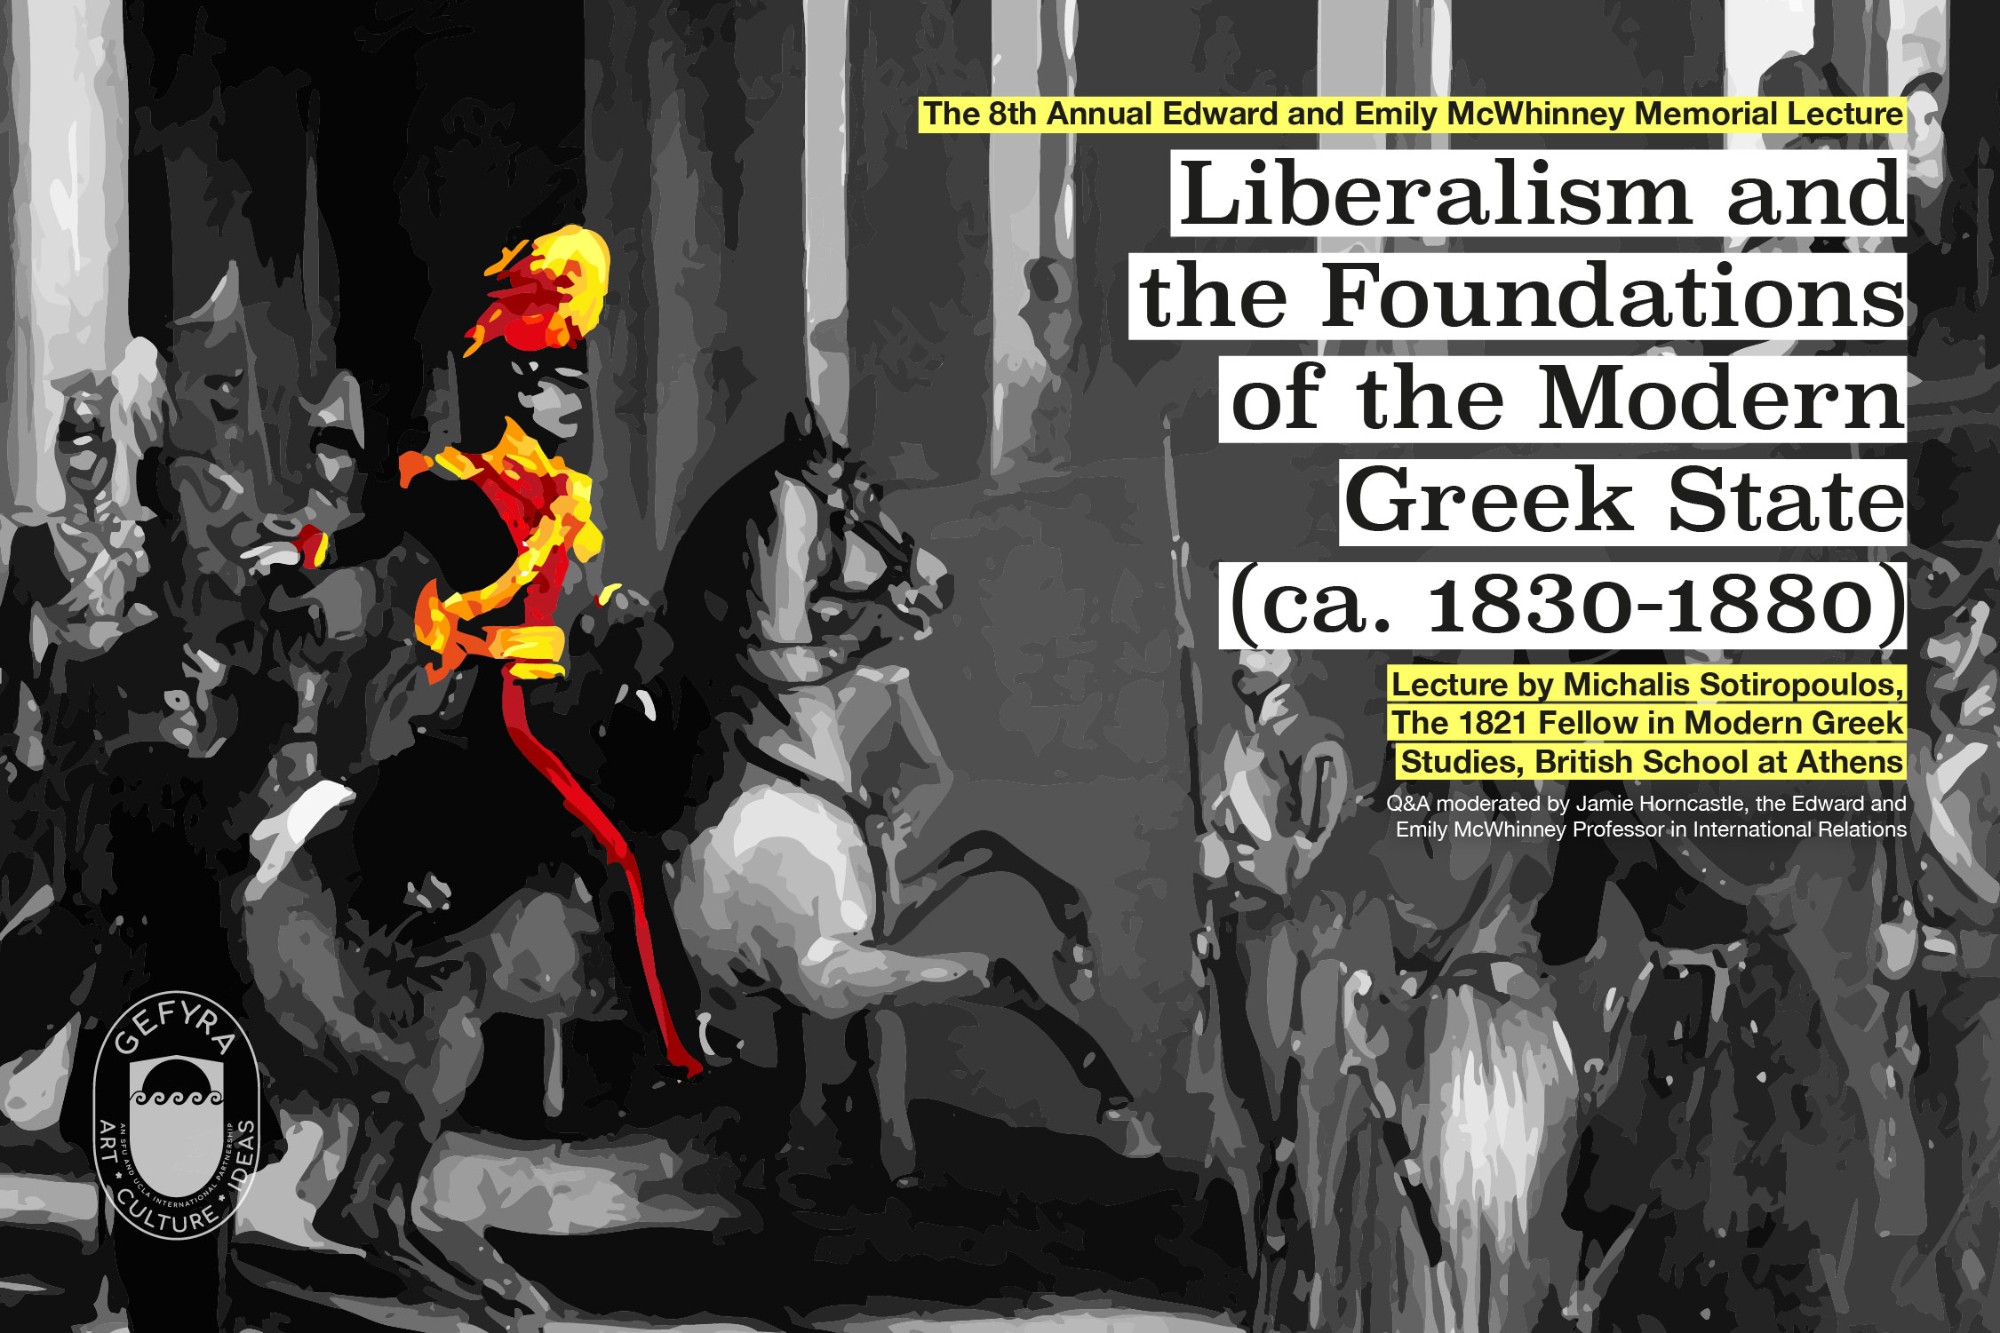 Liberalism and the Foundations of the Modern Greek State (ca 1830-1880): Presenting the 8th Annual McWhinney Memorial Lecture with Michalis Sotiropoulos